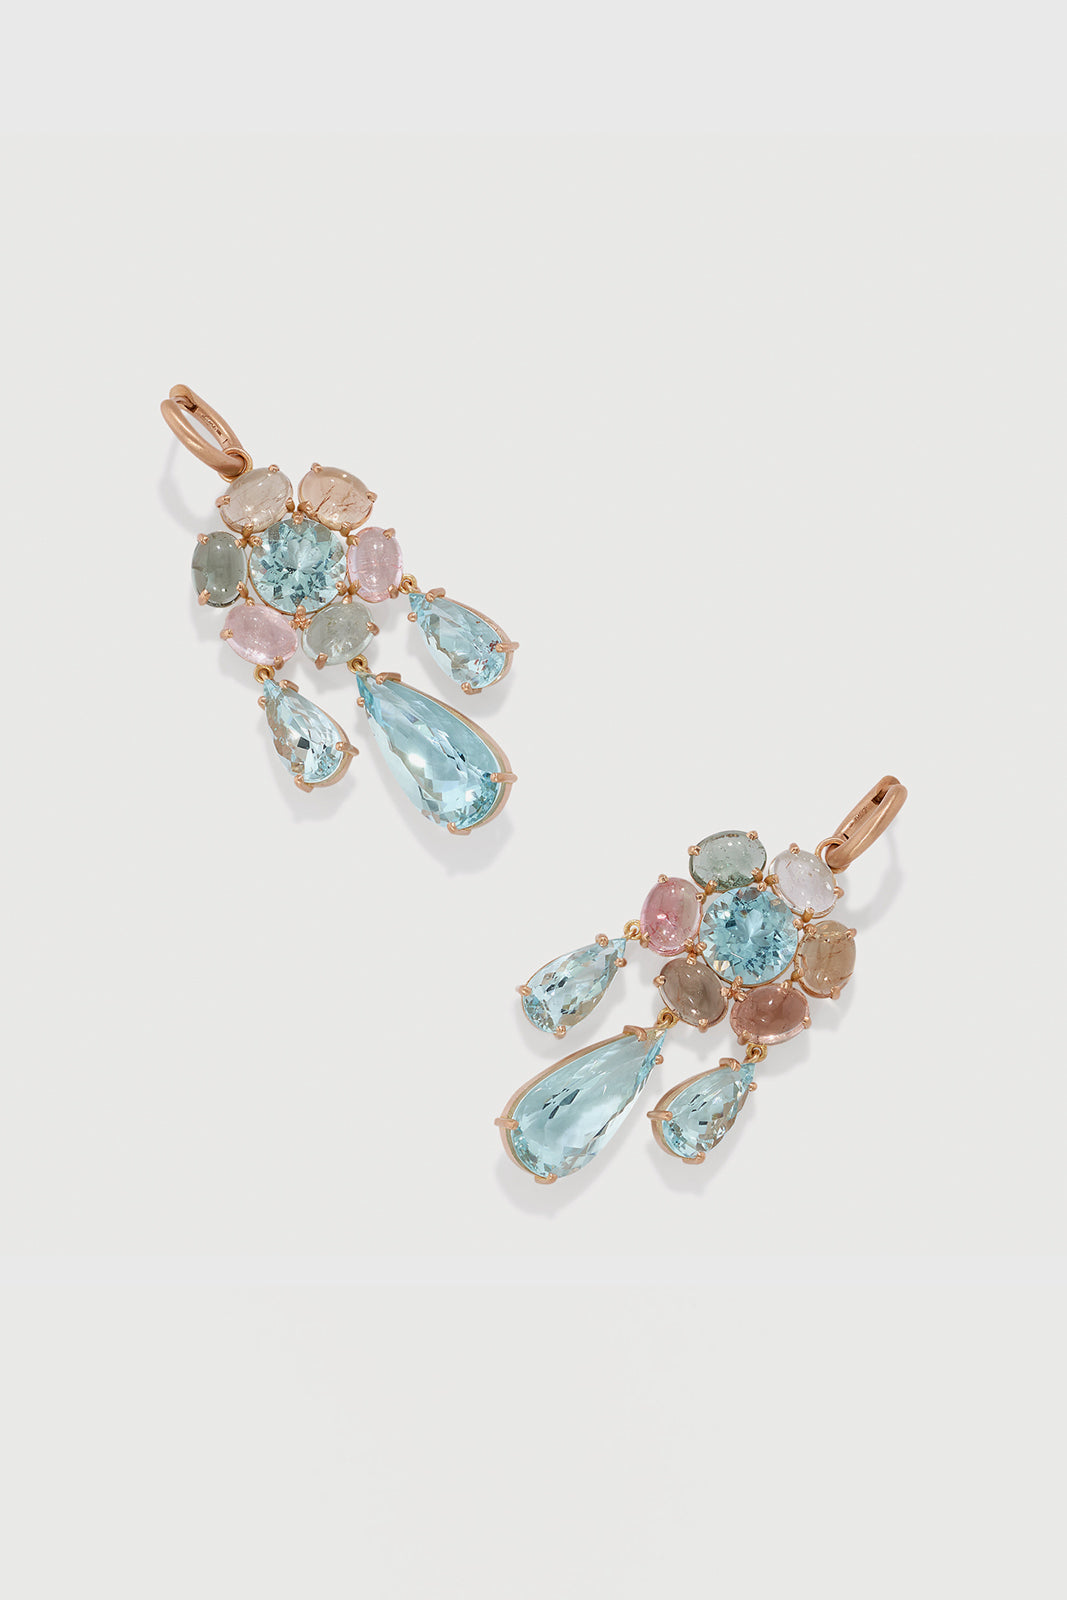 One of a Kind Gemmy Gem 18K Rose Gold Huggie Earrings set with Aquamarine and Tourmaline